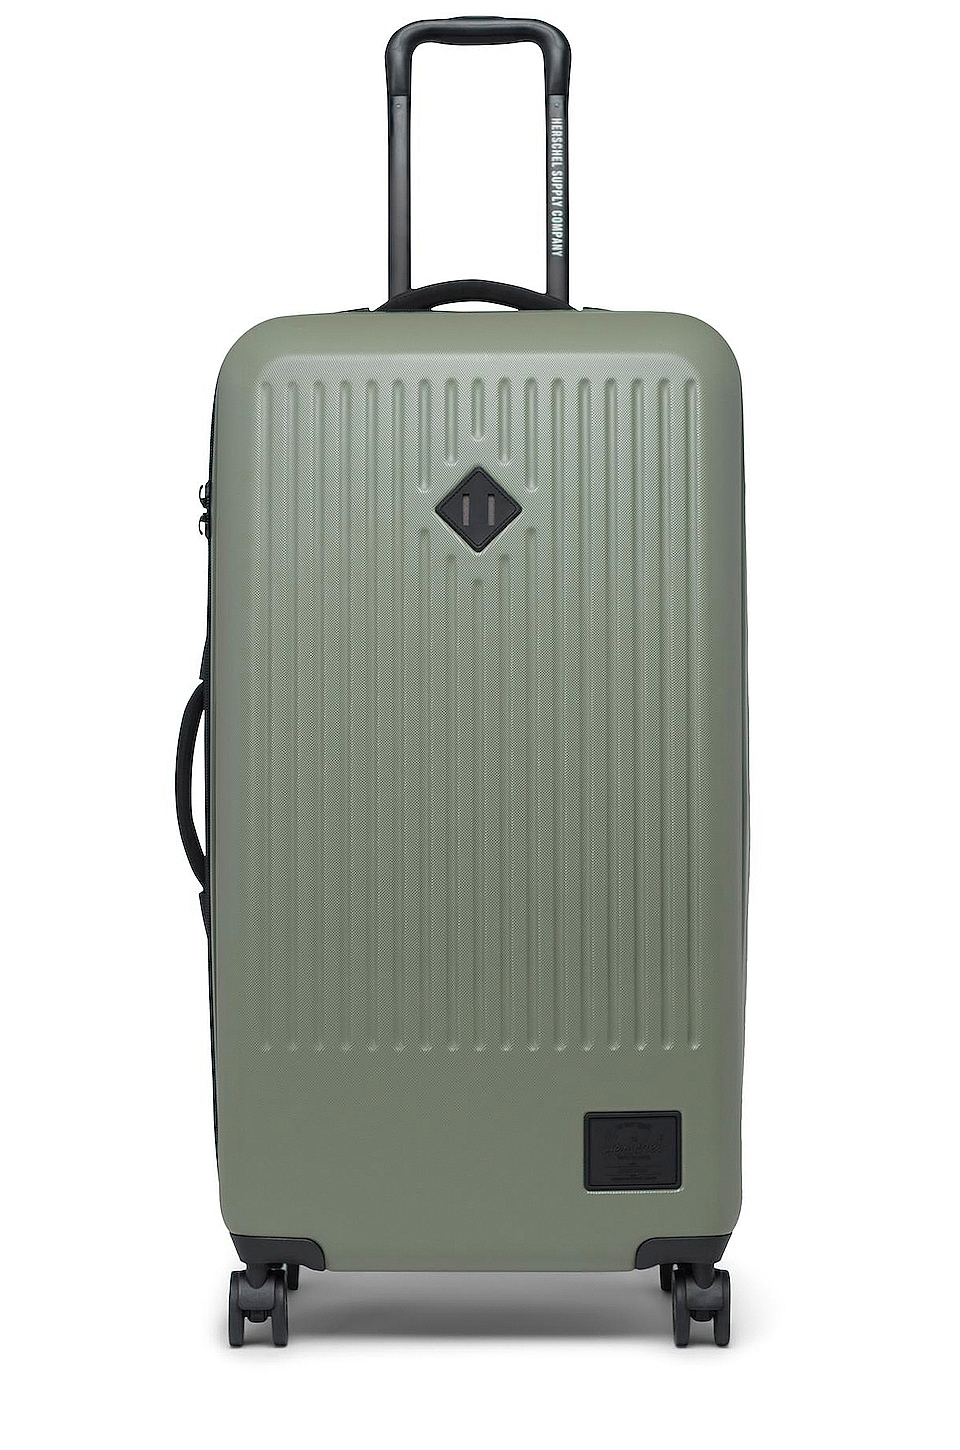 HERSCHEL SUPPLY CO. HERSCHEL SUPPLY CO. TRADE LARGE LUGGAGE IN OLIVE.,HERS-WY99